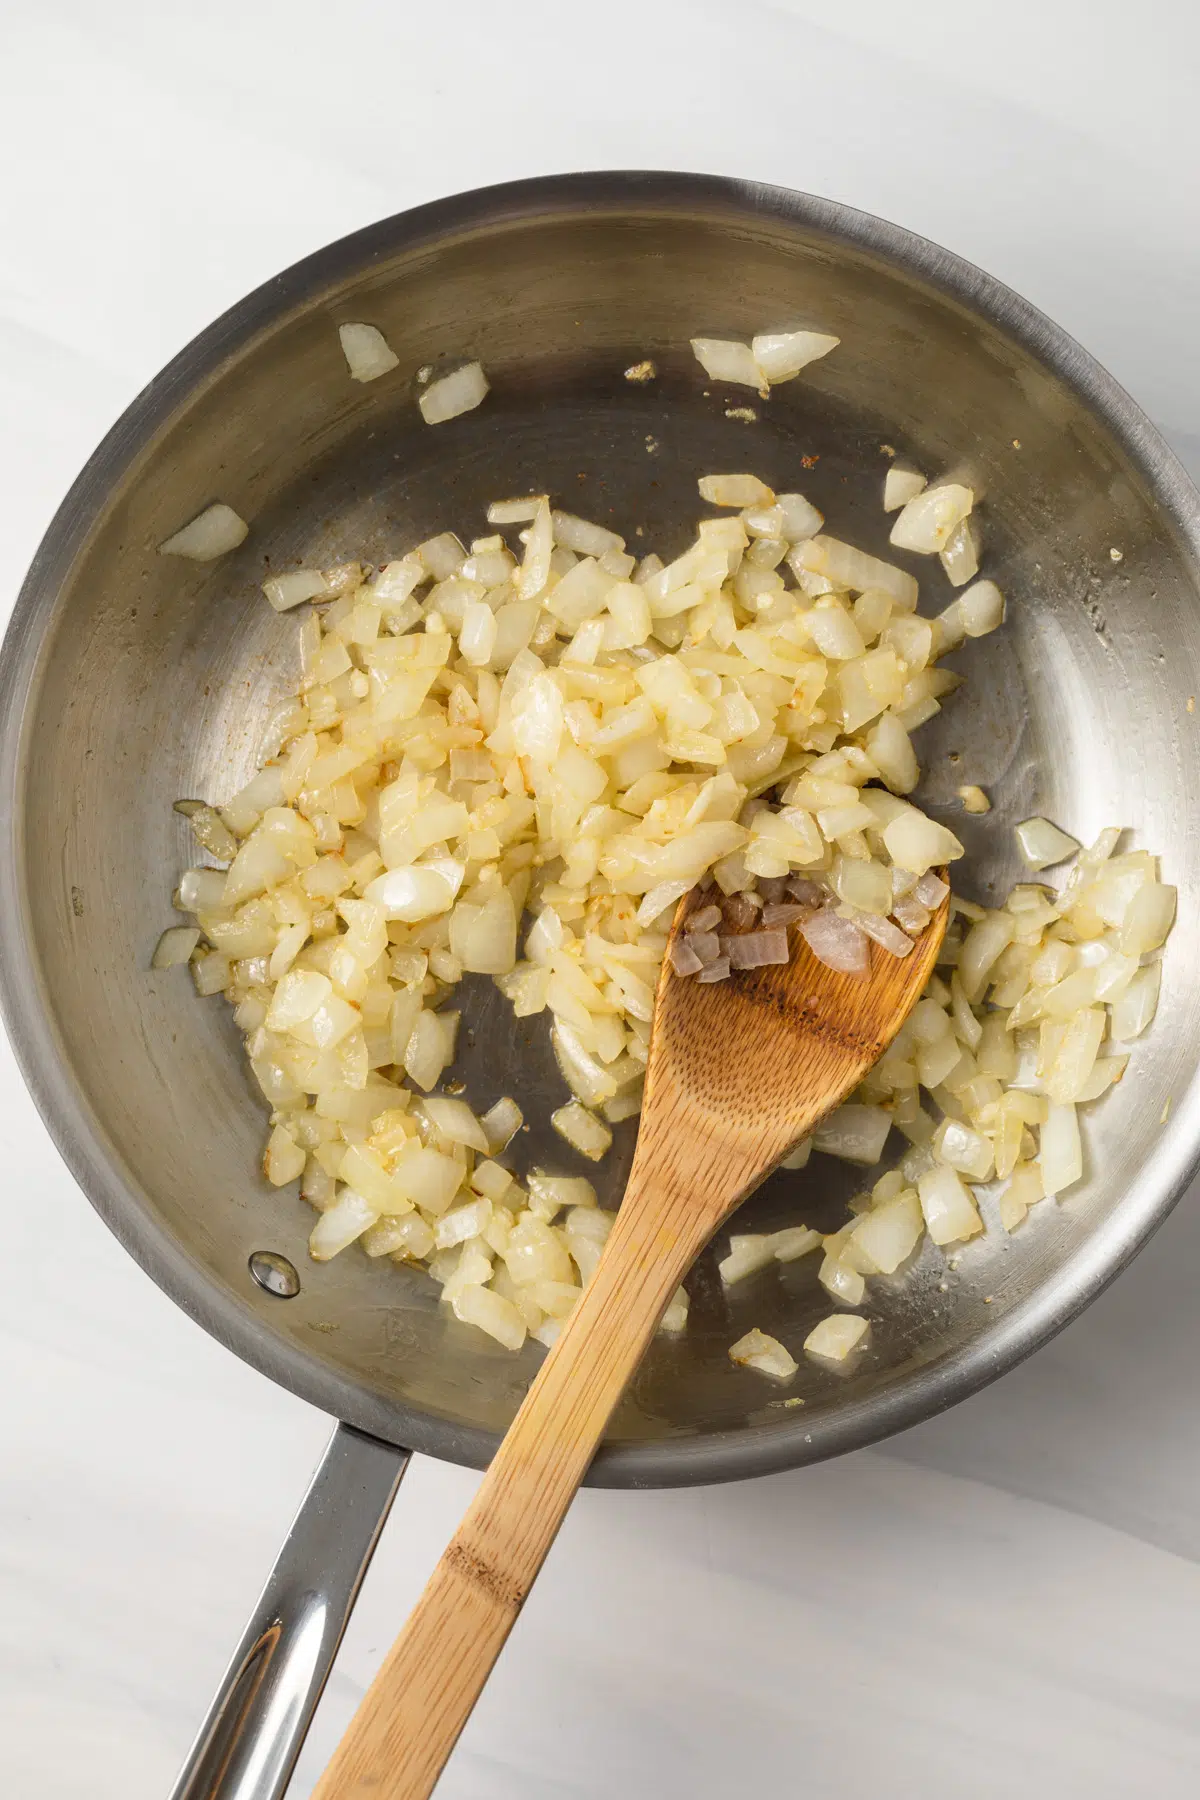 Sauteed onions and garlic in a fry pan.